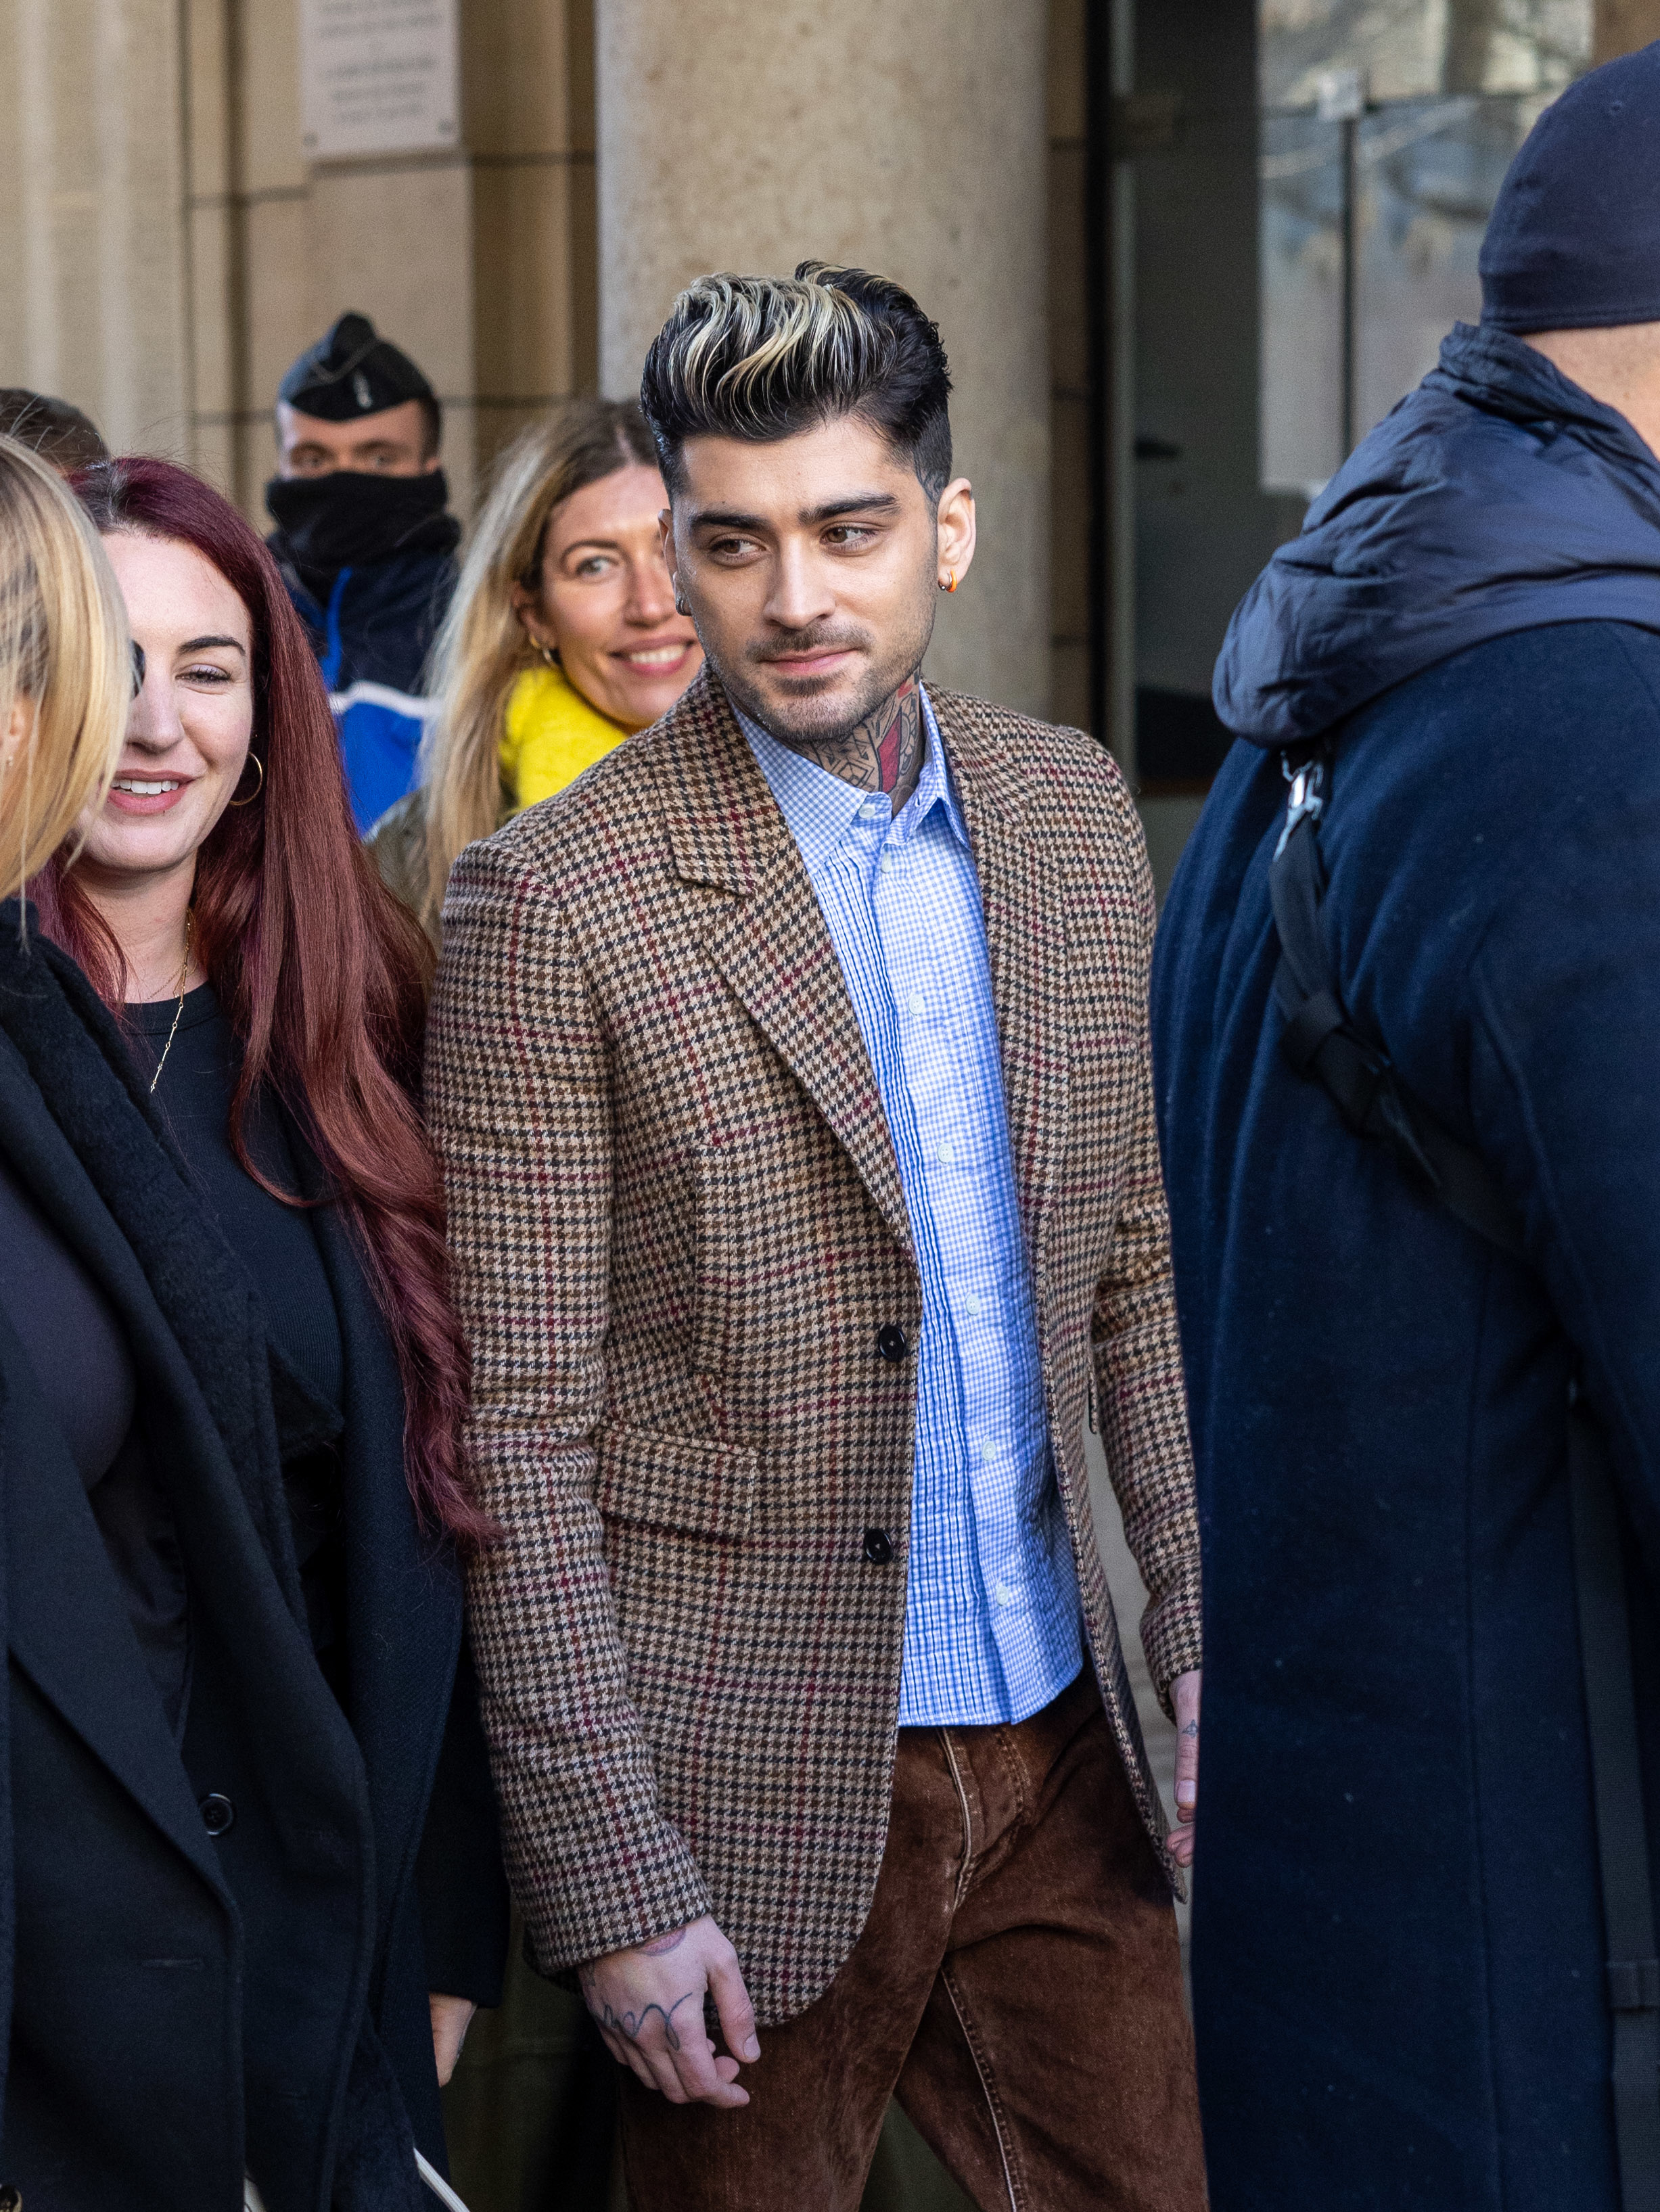 Zayn Malik in a checkered jacket and brown trousers in a group of people